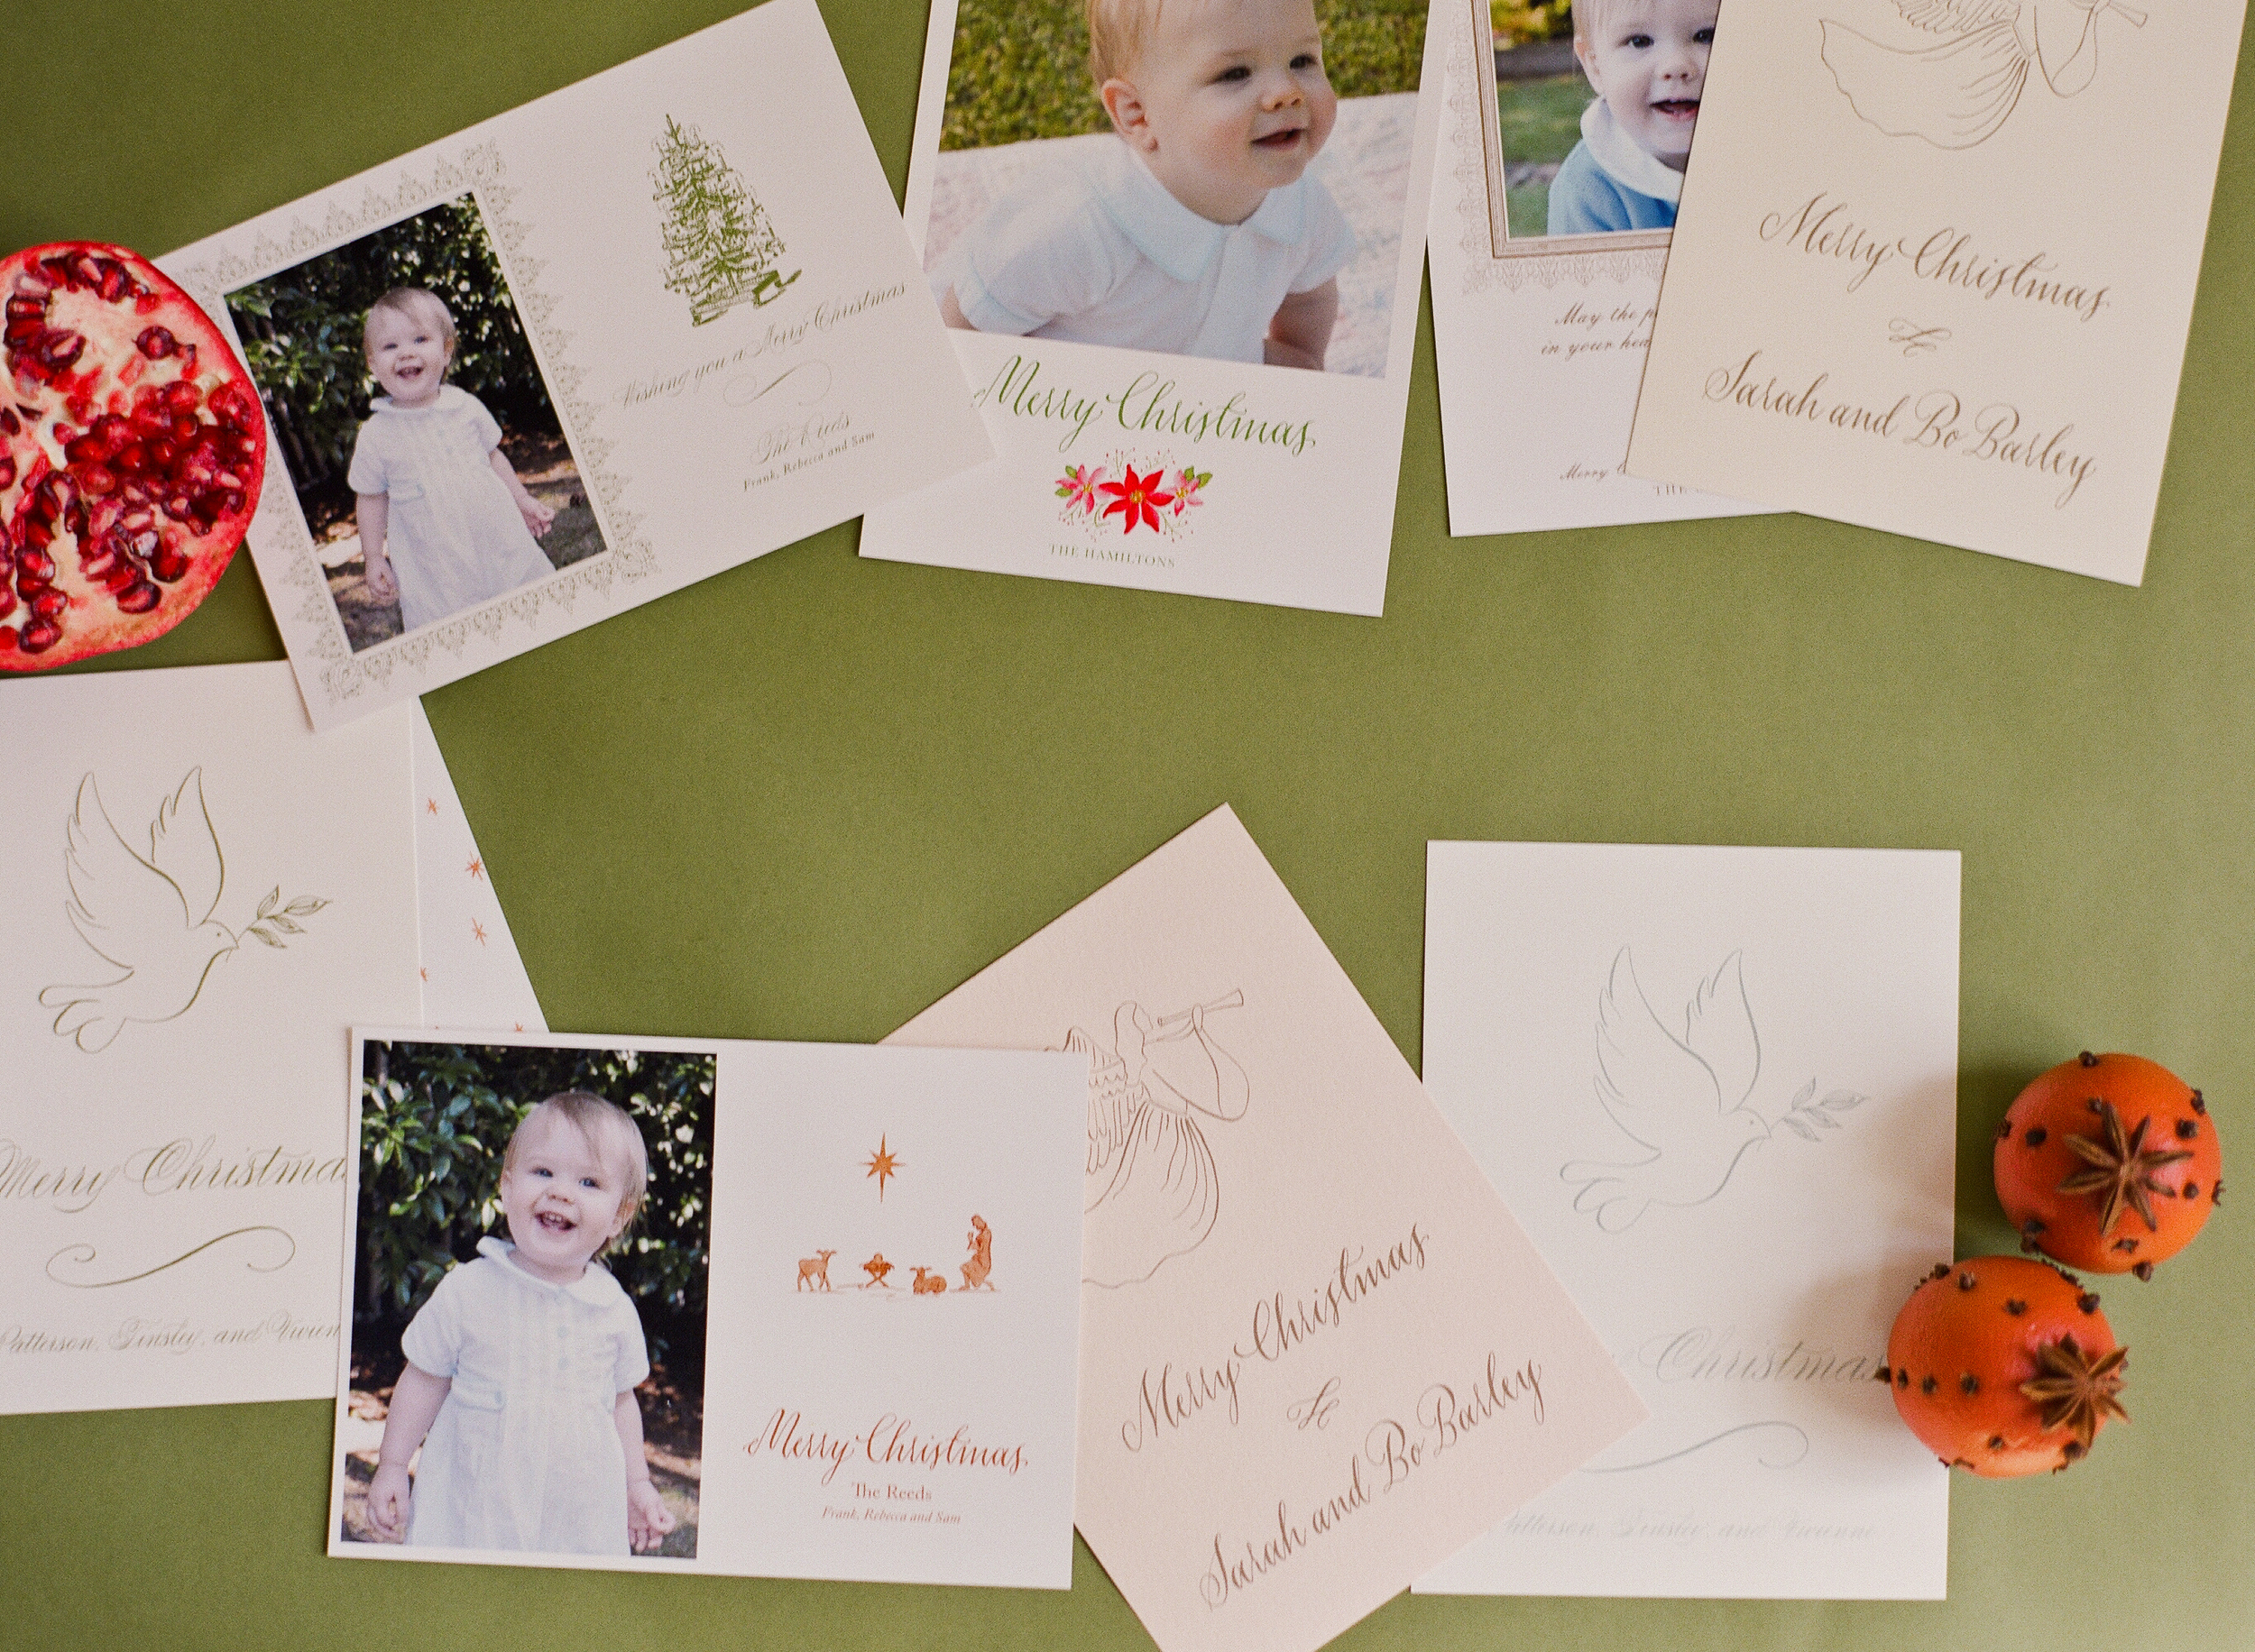 How To List Your Names On Holiday Cards Calabash Card Co